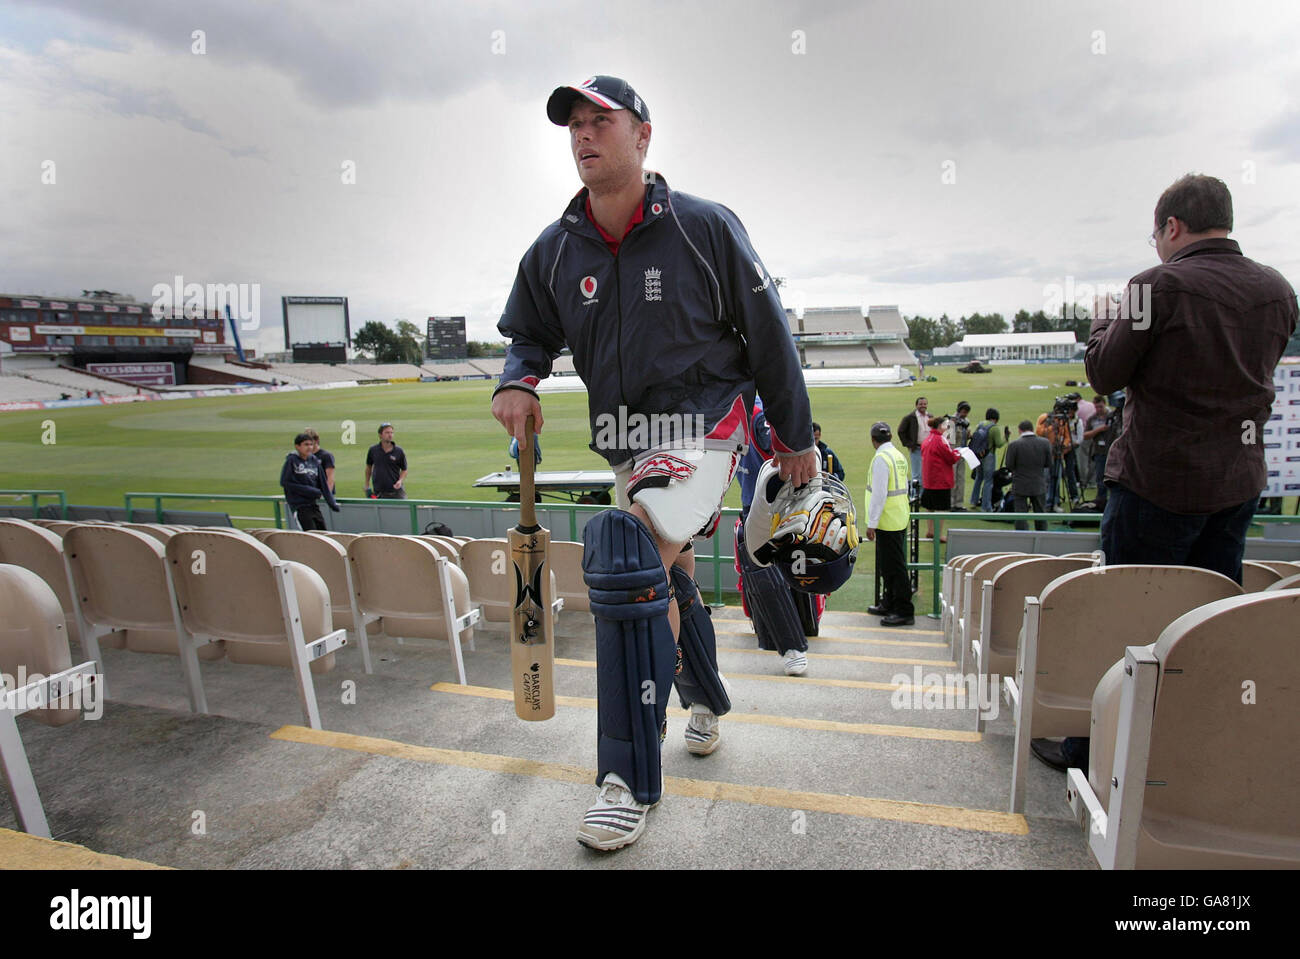 Cricket - England Training Session - Old Trafford Stock Photo